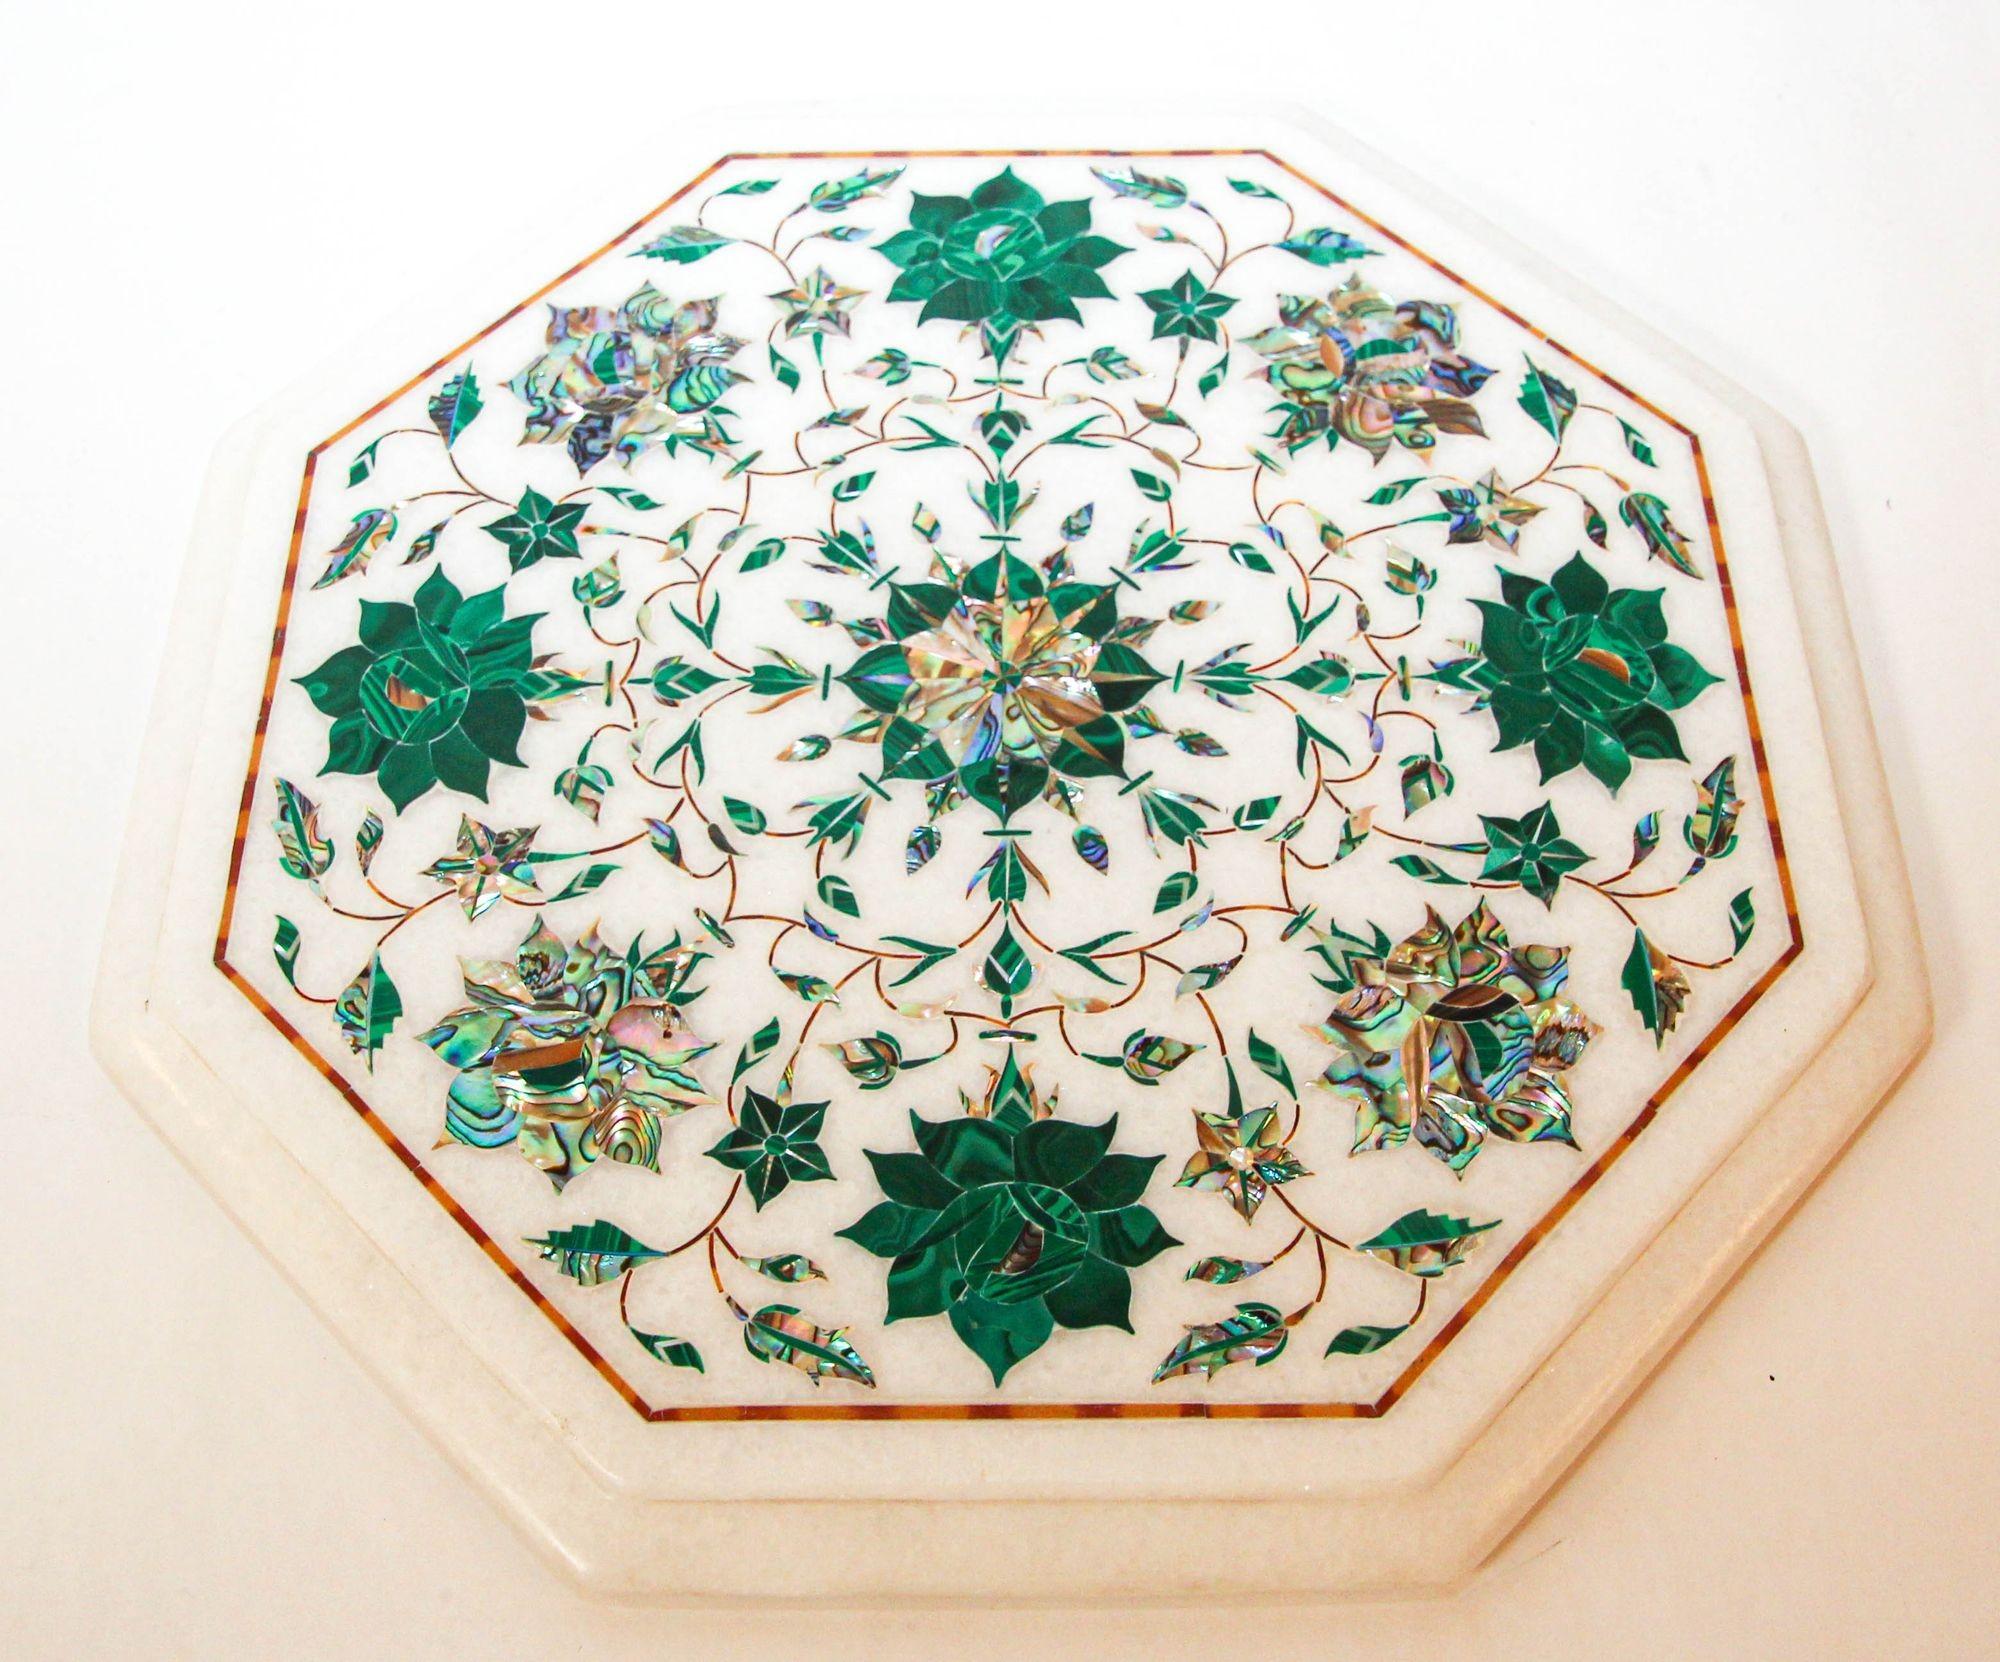 Pietra Dura White Mosaic Octagonal Inlaid Marble Top Handcrafted Agra India 1980 For Sale 5